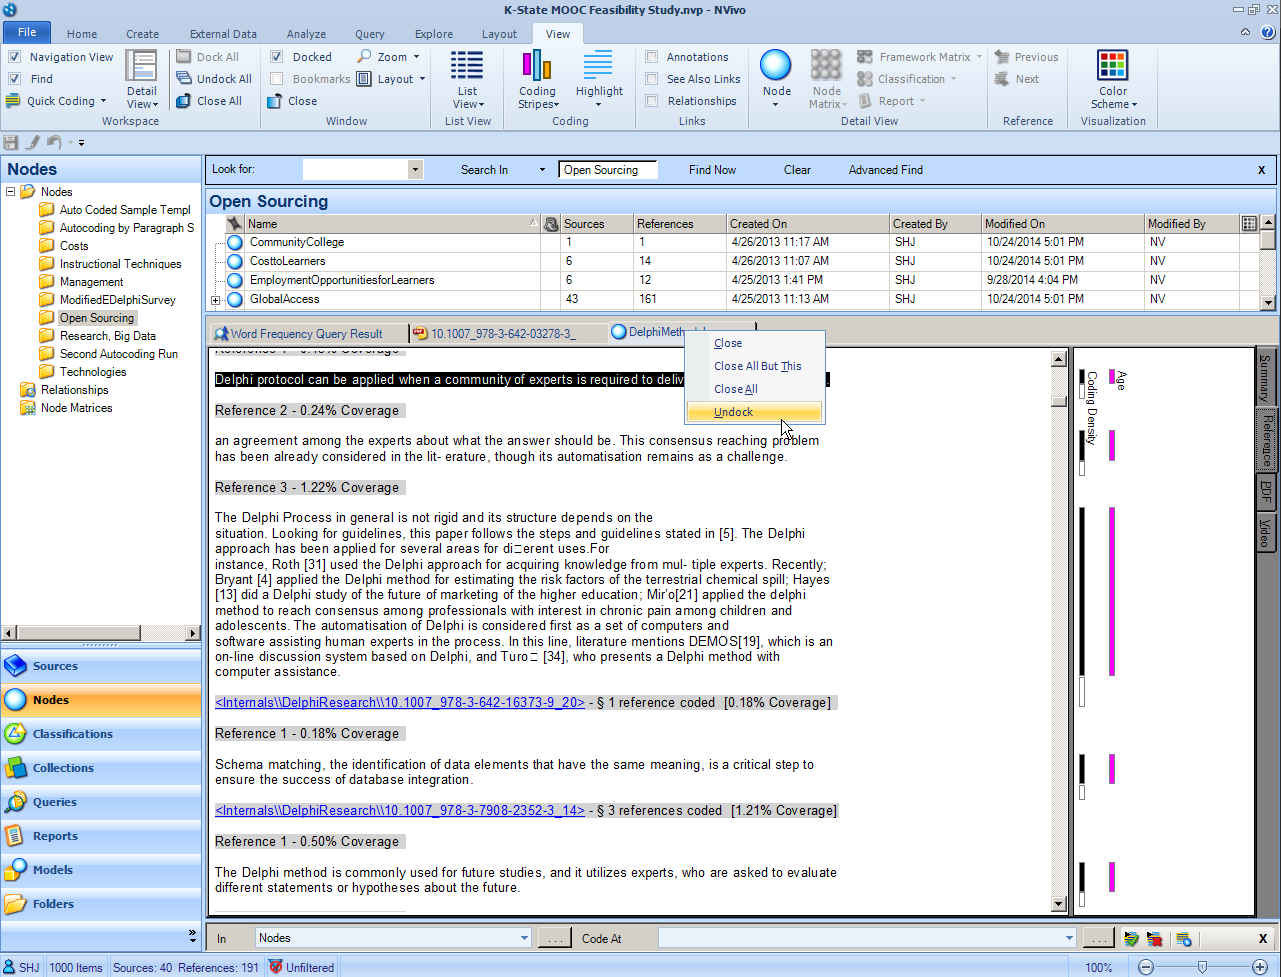 nvivo and hyperresearch are statistical software packages